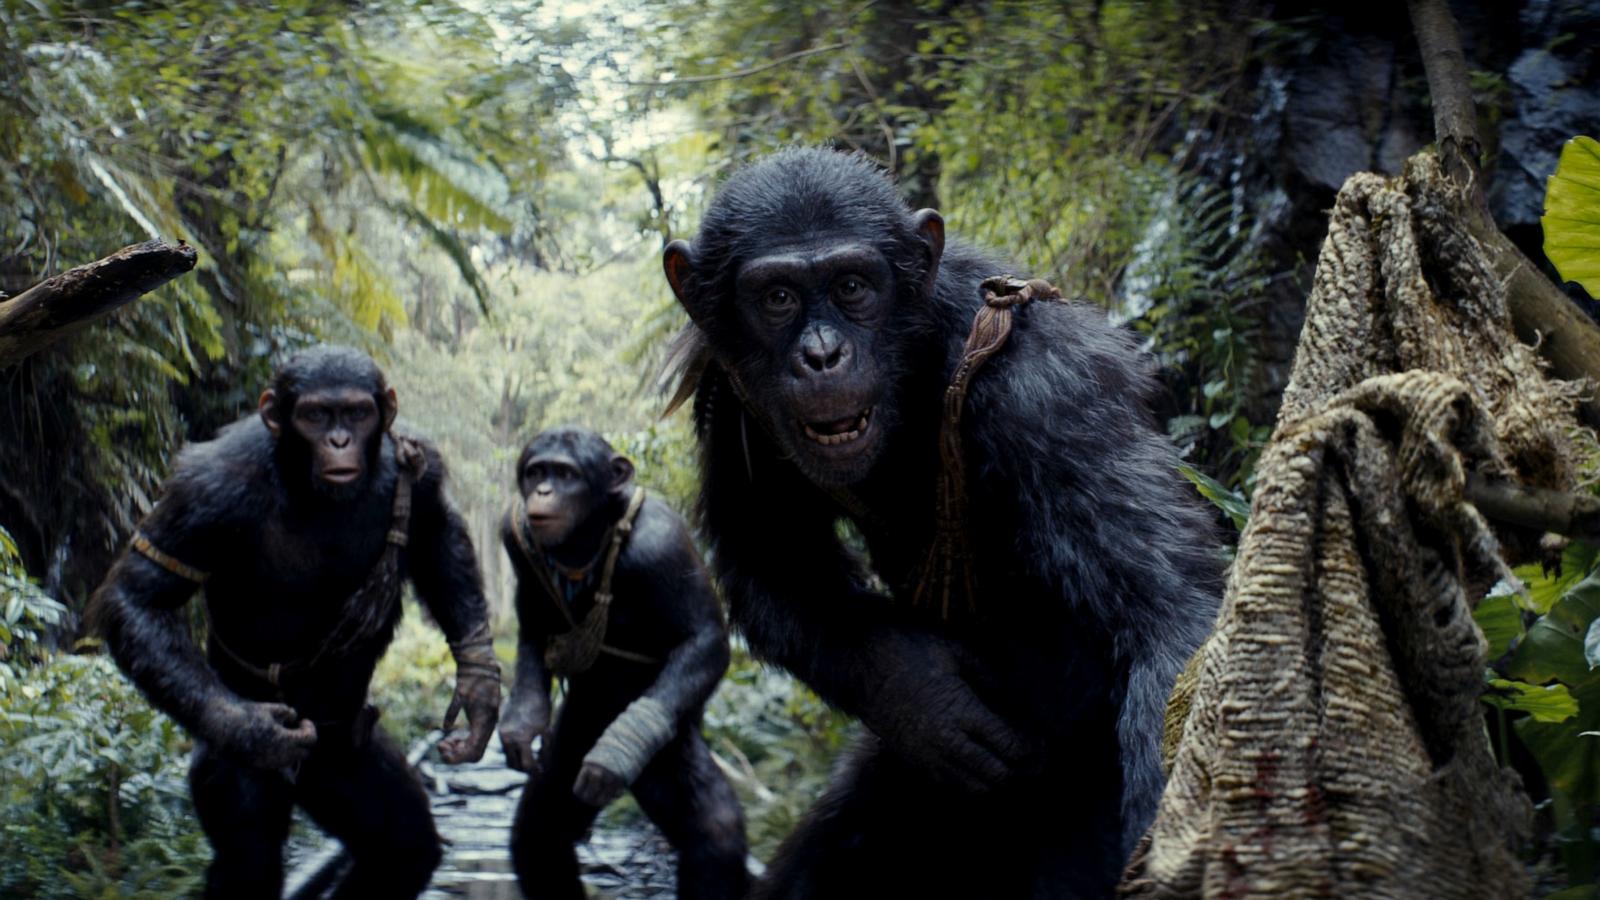 PHOTO: Scene from "Kingdom of the Planet of the Apes."